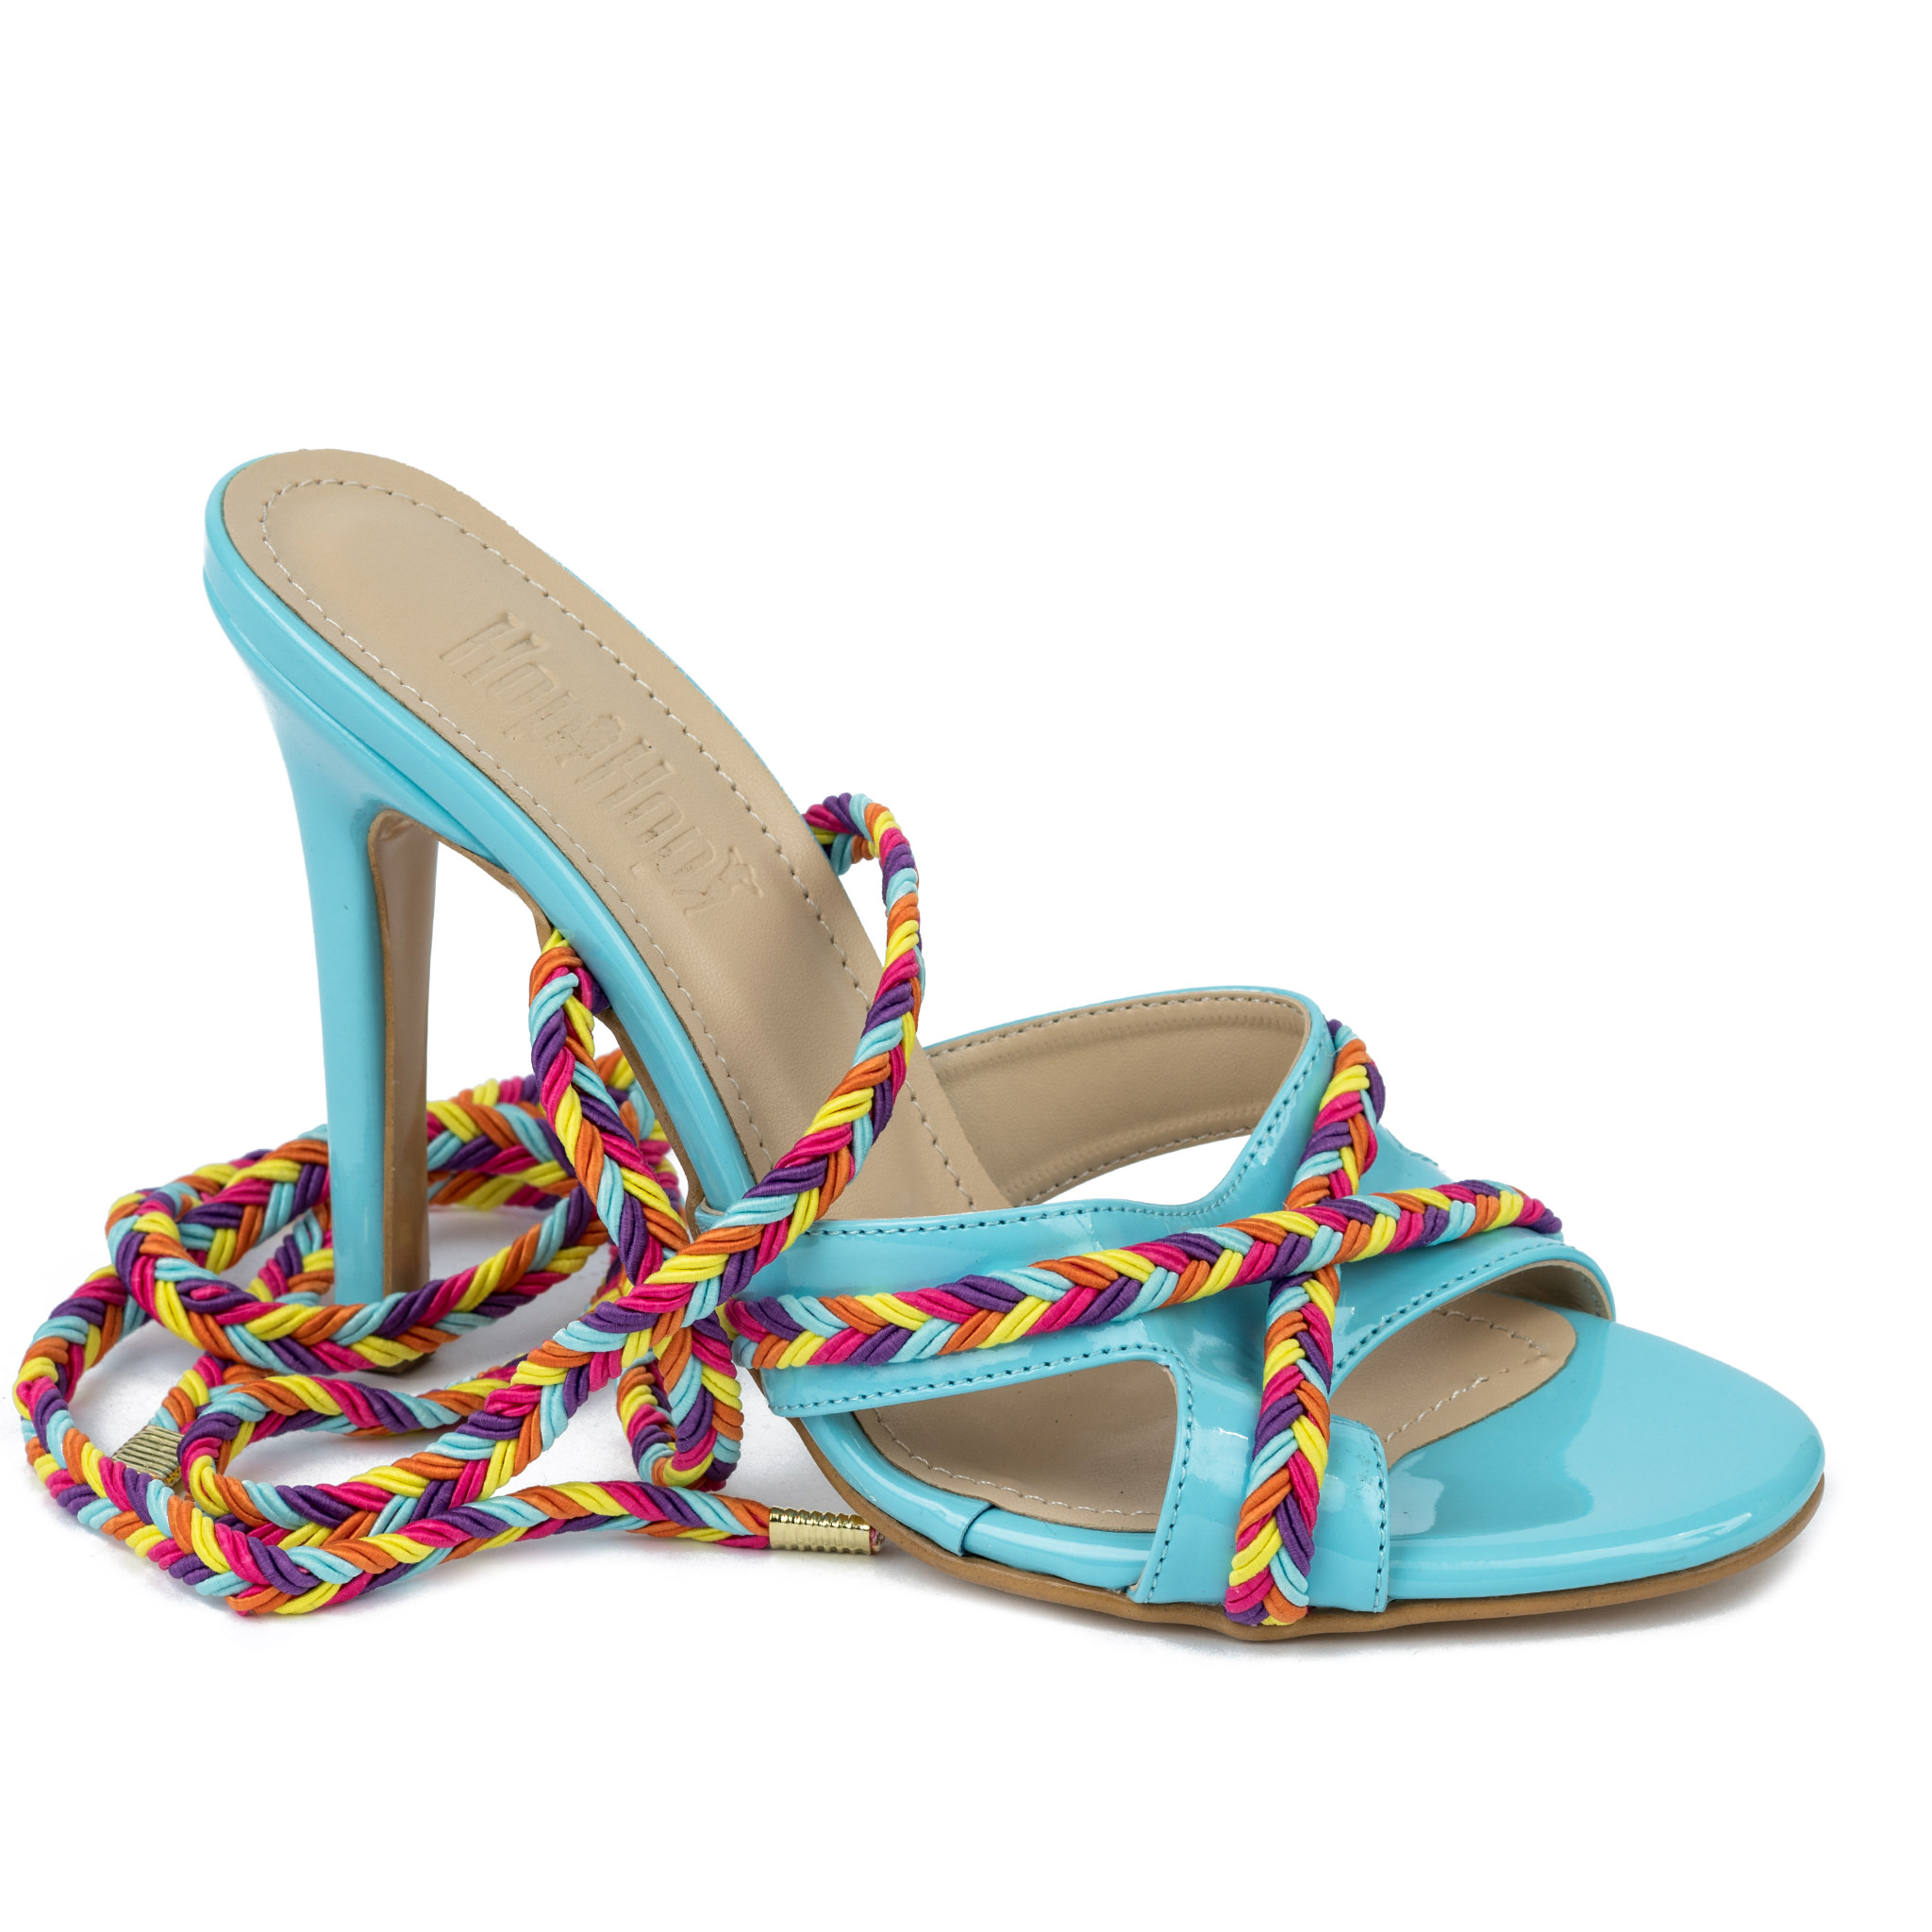 LACE UP SANDALS THIN HEEL - BLUE